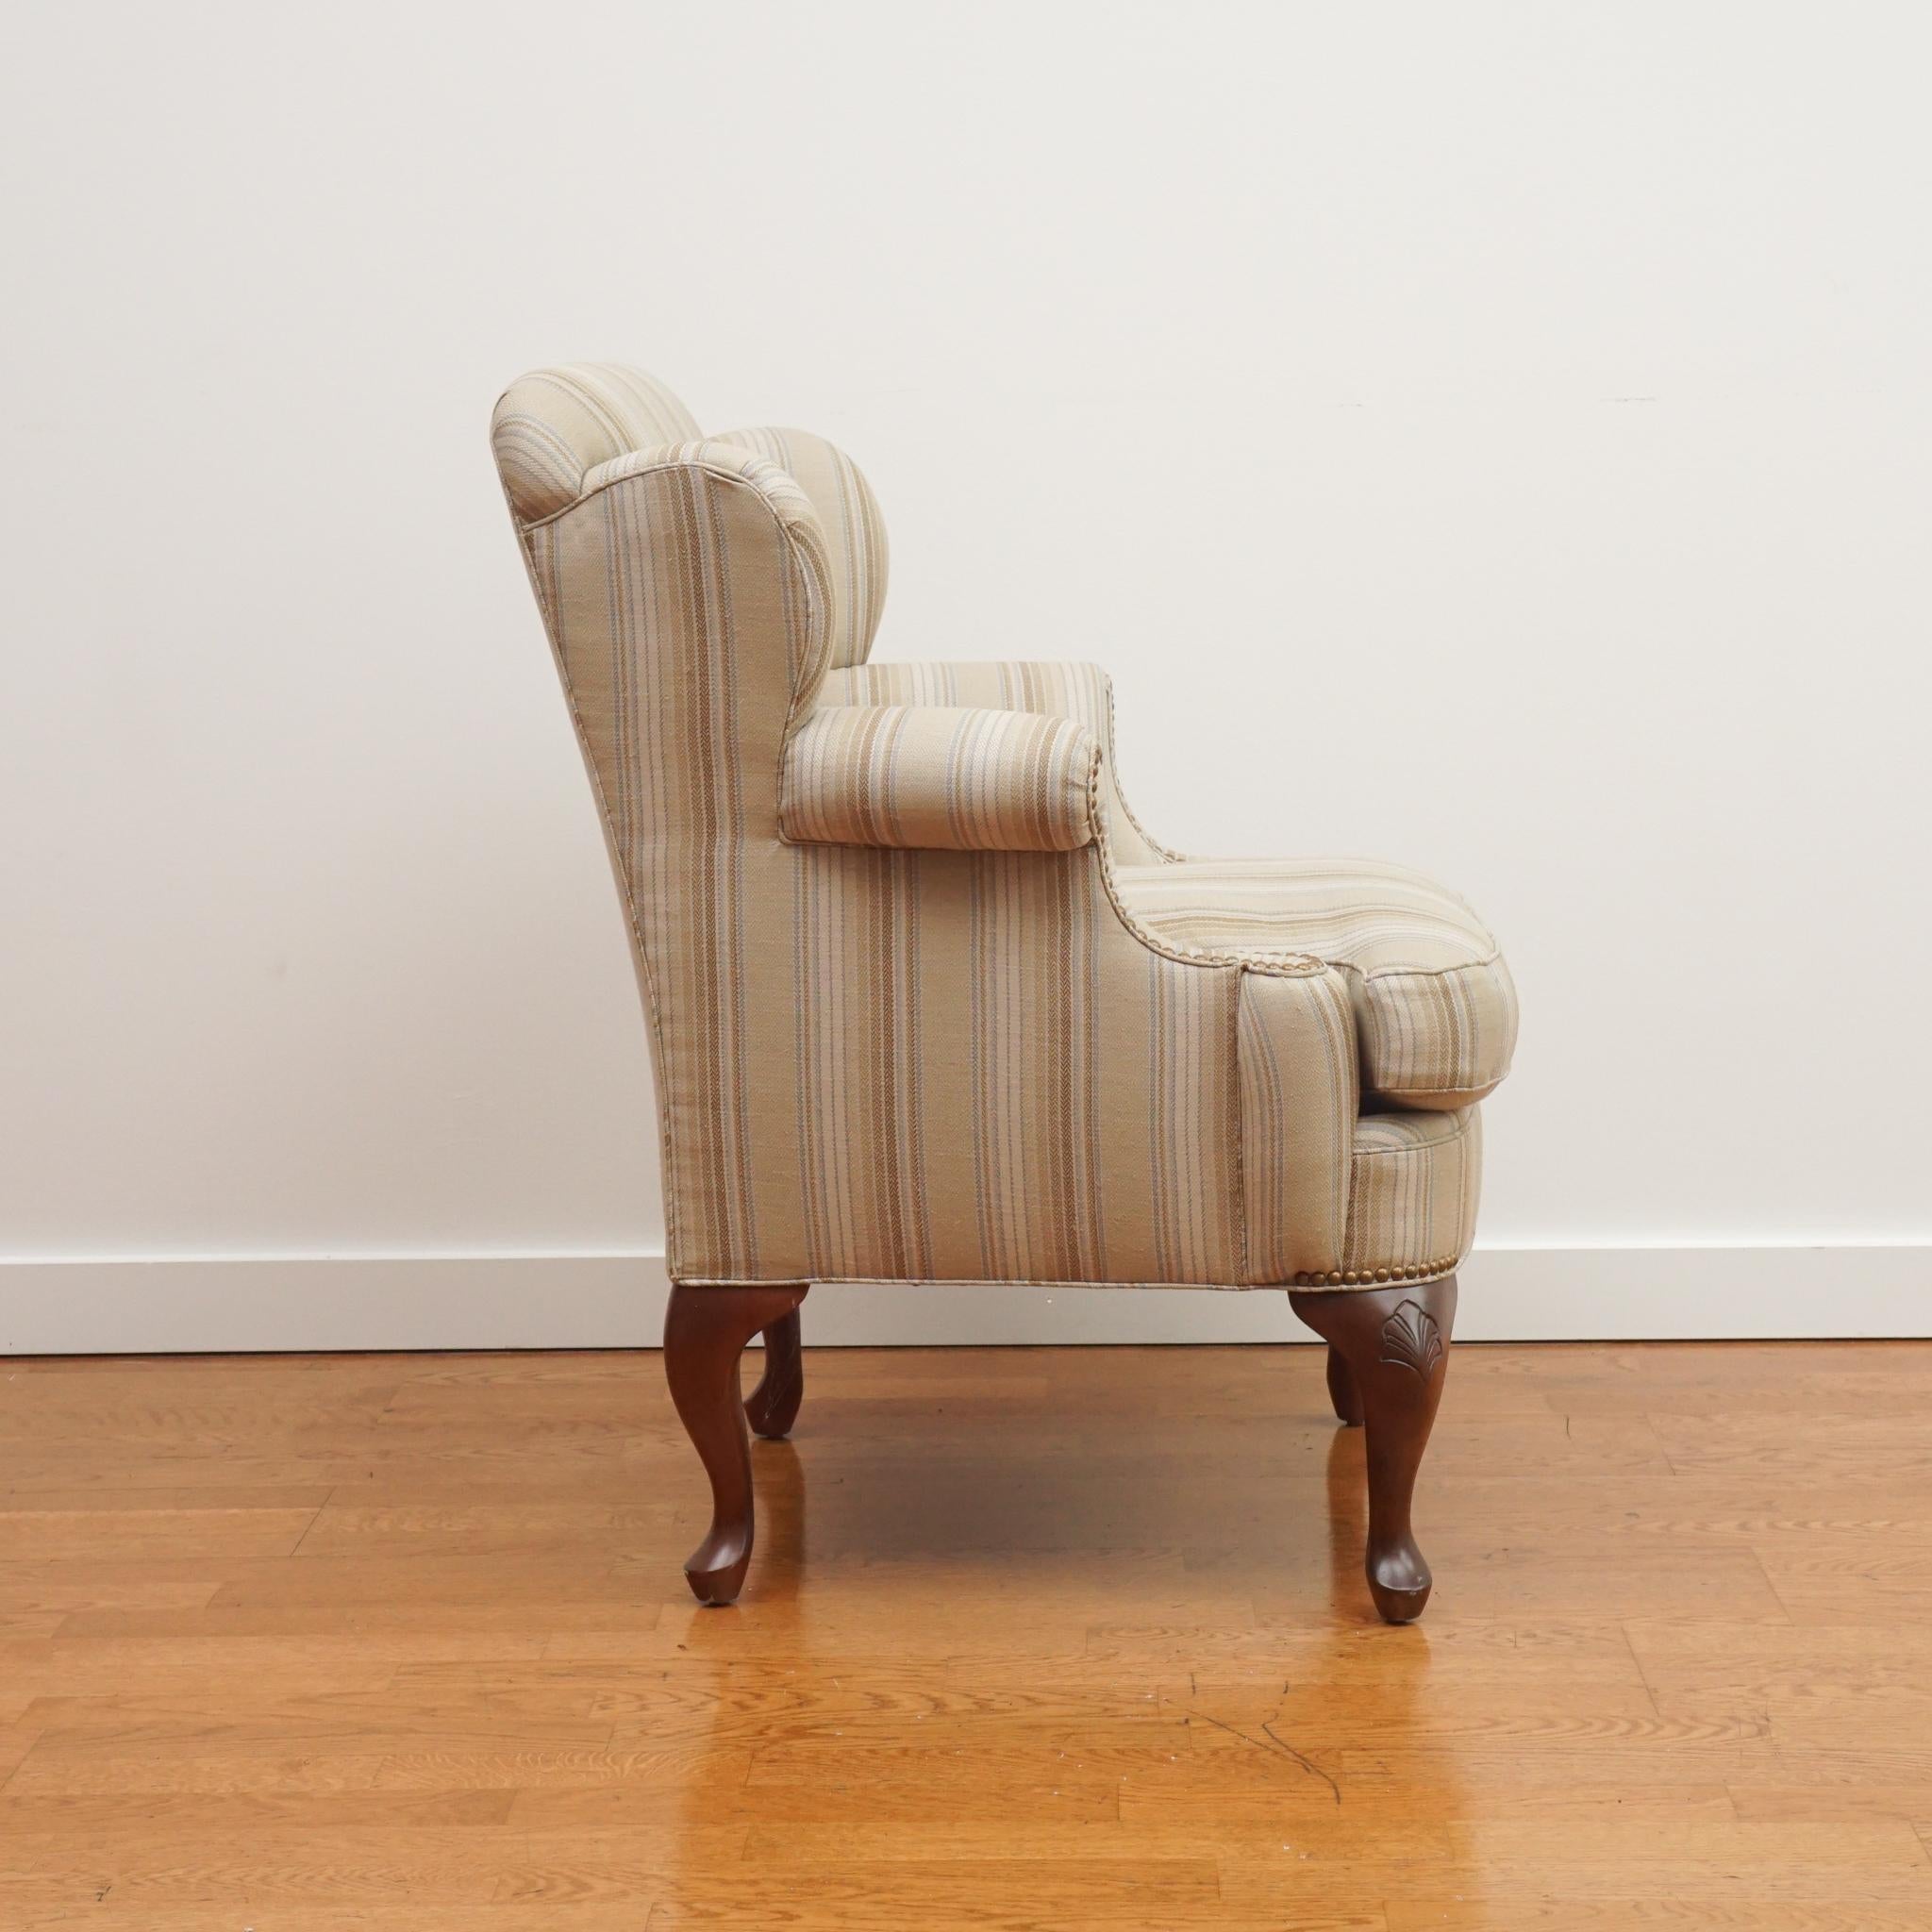 American Petite Queen Anne-Style Wing Chair